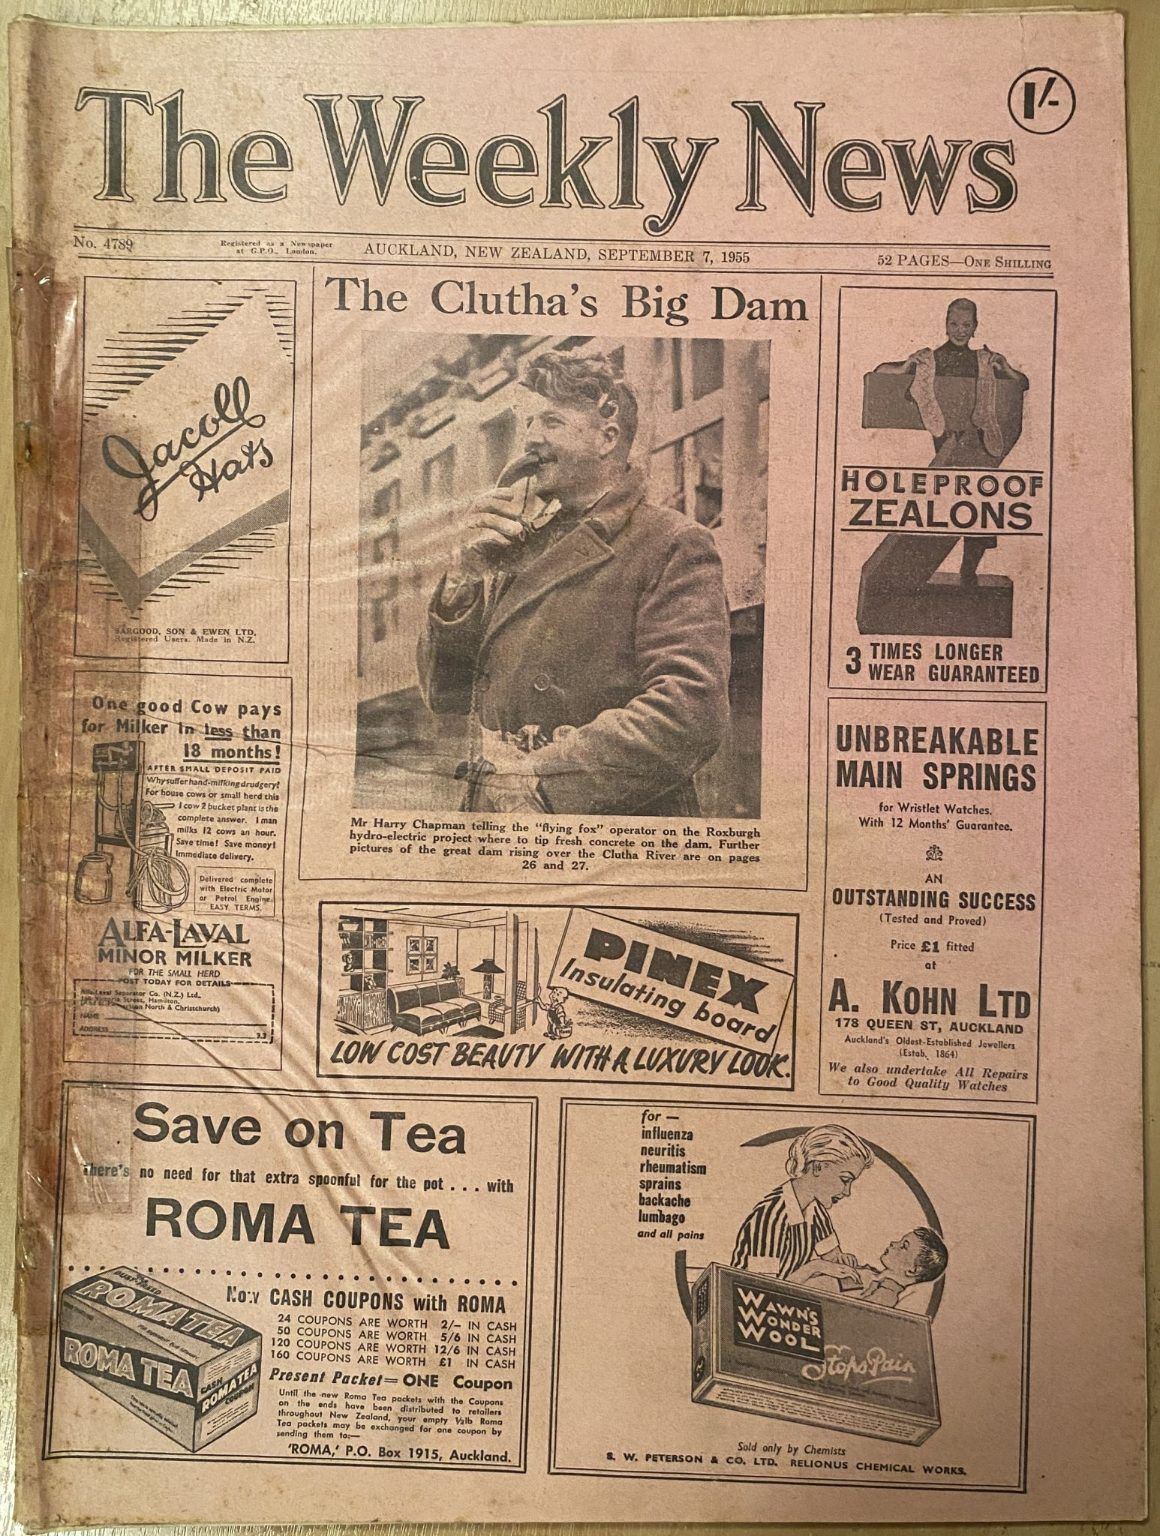 OLD NEWSPAPER: The Weekly News - No. 4789, 7 September 1955